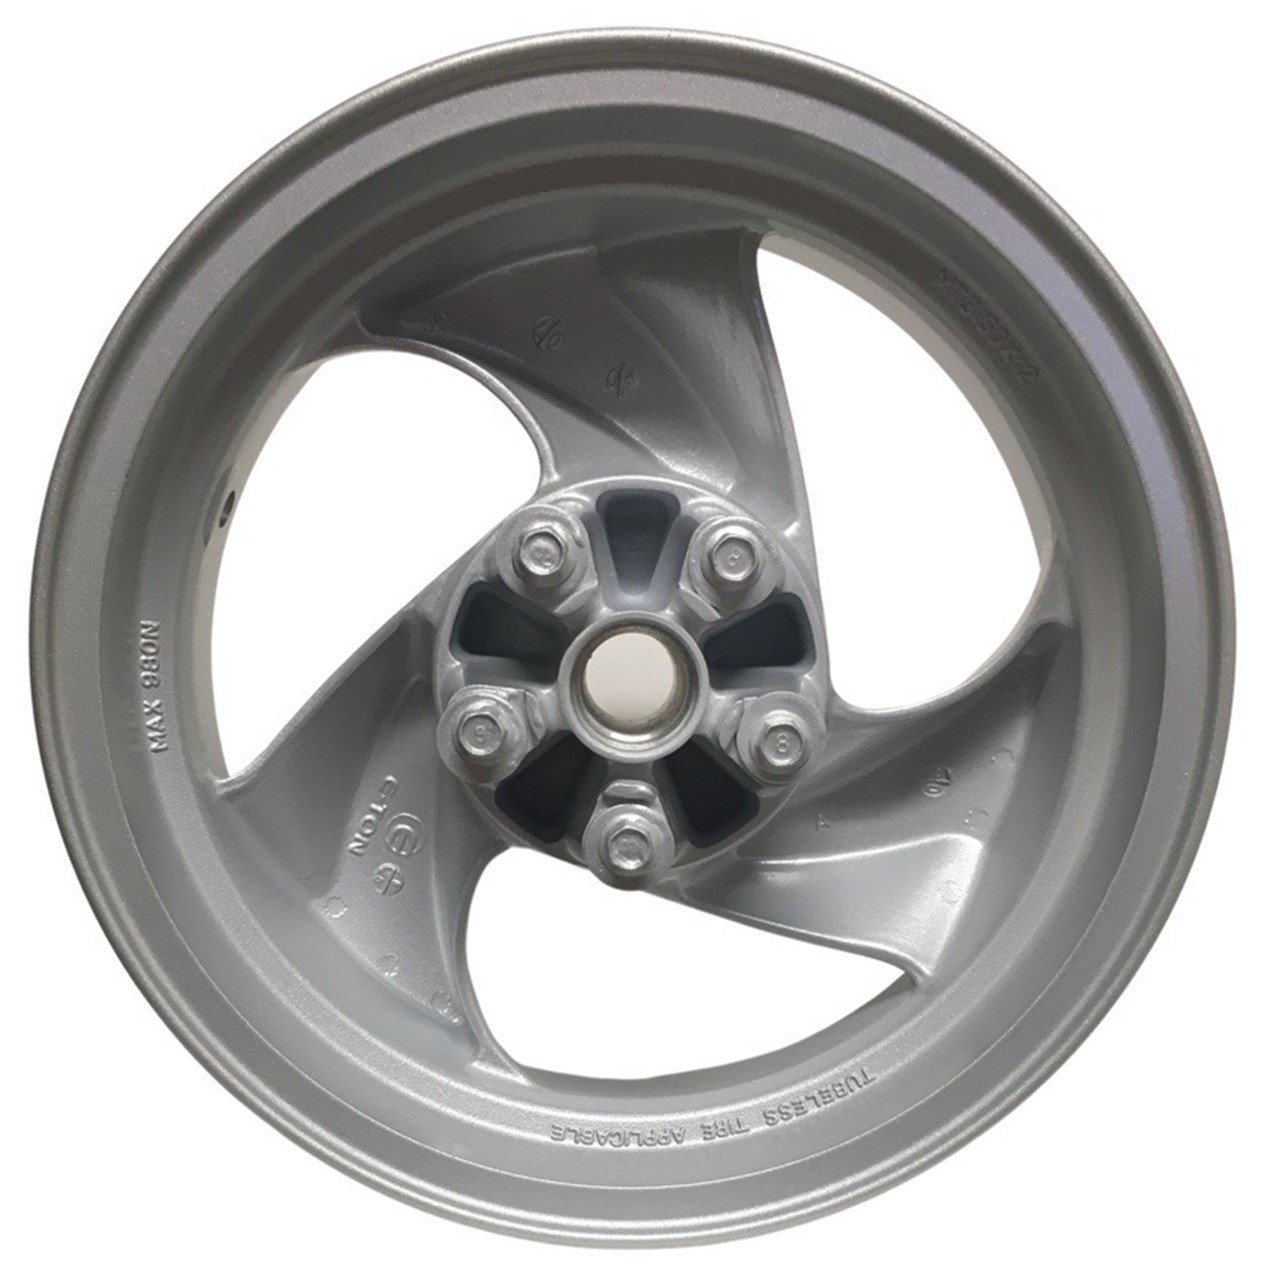 Front Wheel Rim (3.5x12), Rotor Bolt Pattern=5x80mm (50mm to adjacent stud) Offset=1.25 in, Shaft ID=30 mm, Silver Fite E-Ton Beamer R2-50, R4-150, Matrix 50, 150 Scooters + others - Click Image to Close